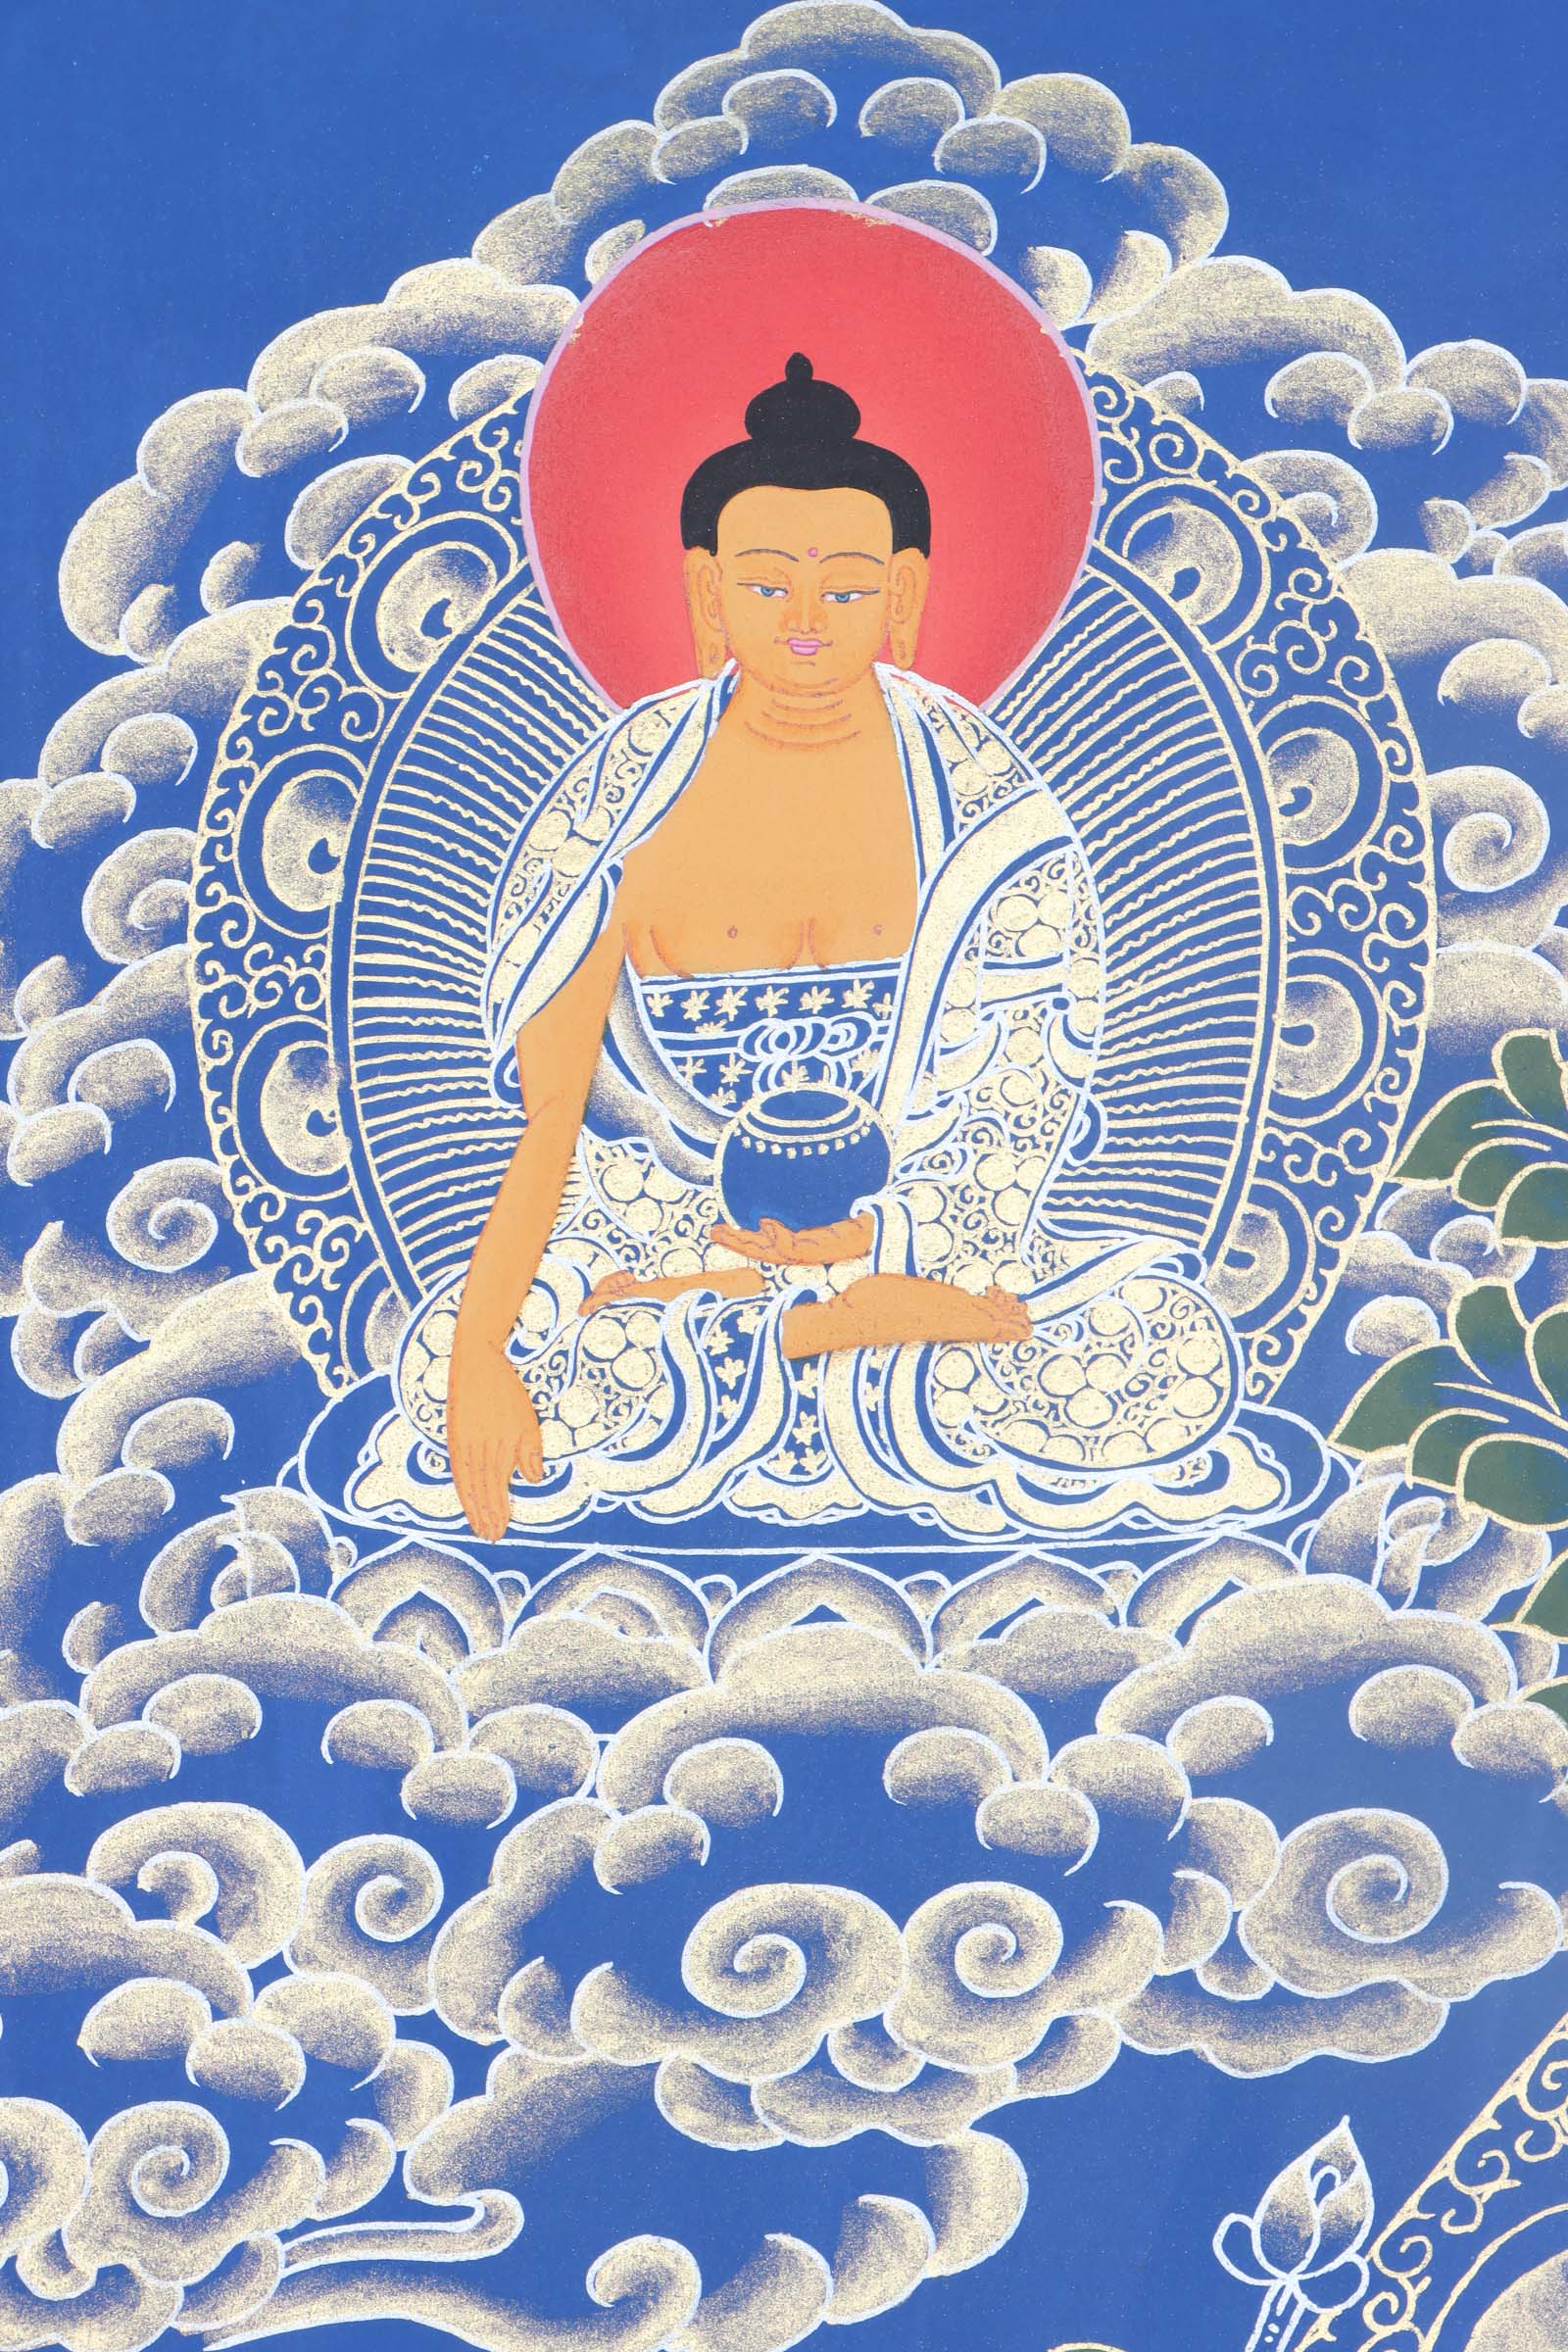 White Tara Thangka Painting - Painted by skillful artisan using only nature stone color - Himalayas Shop